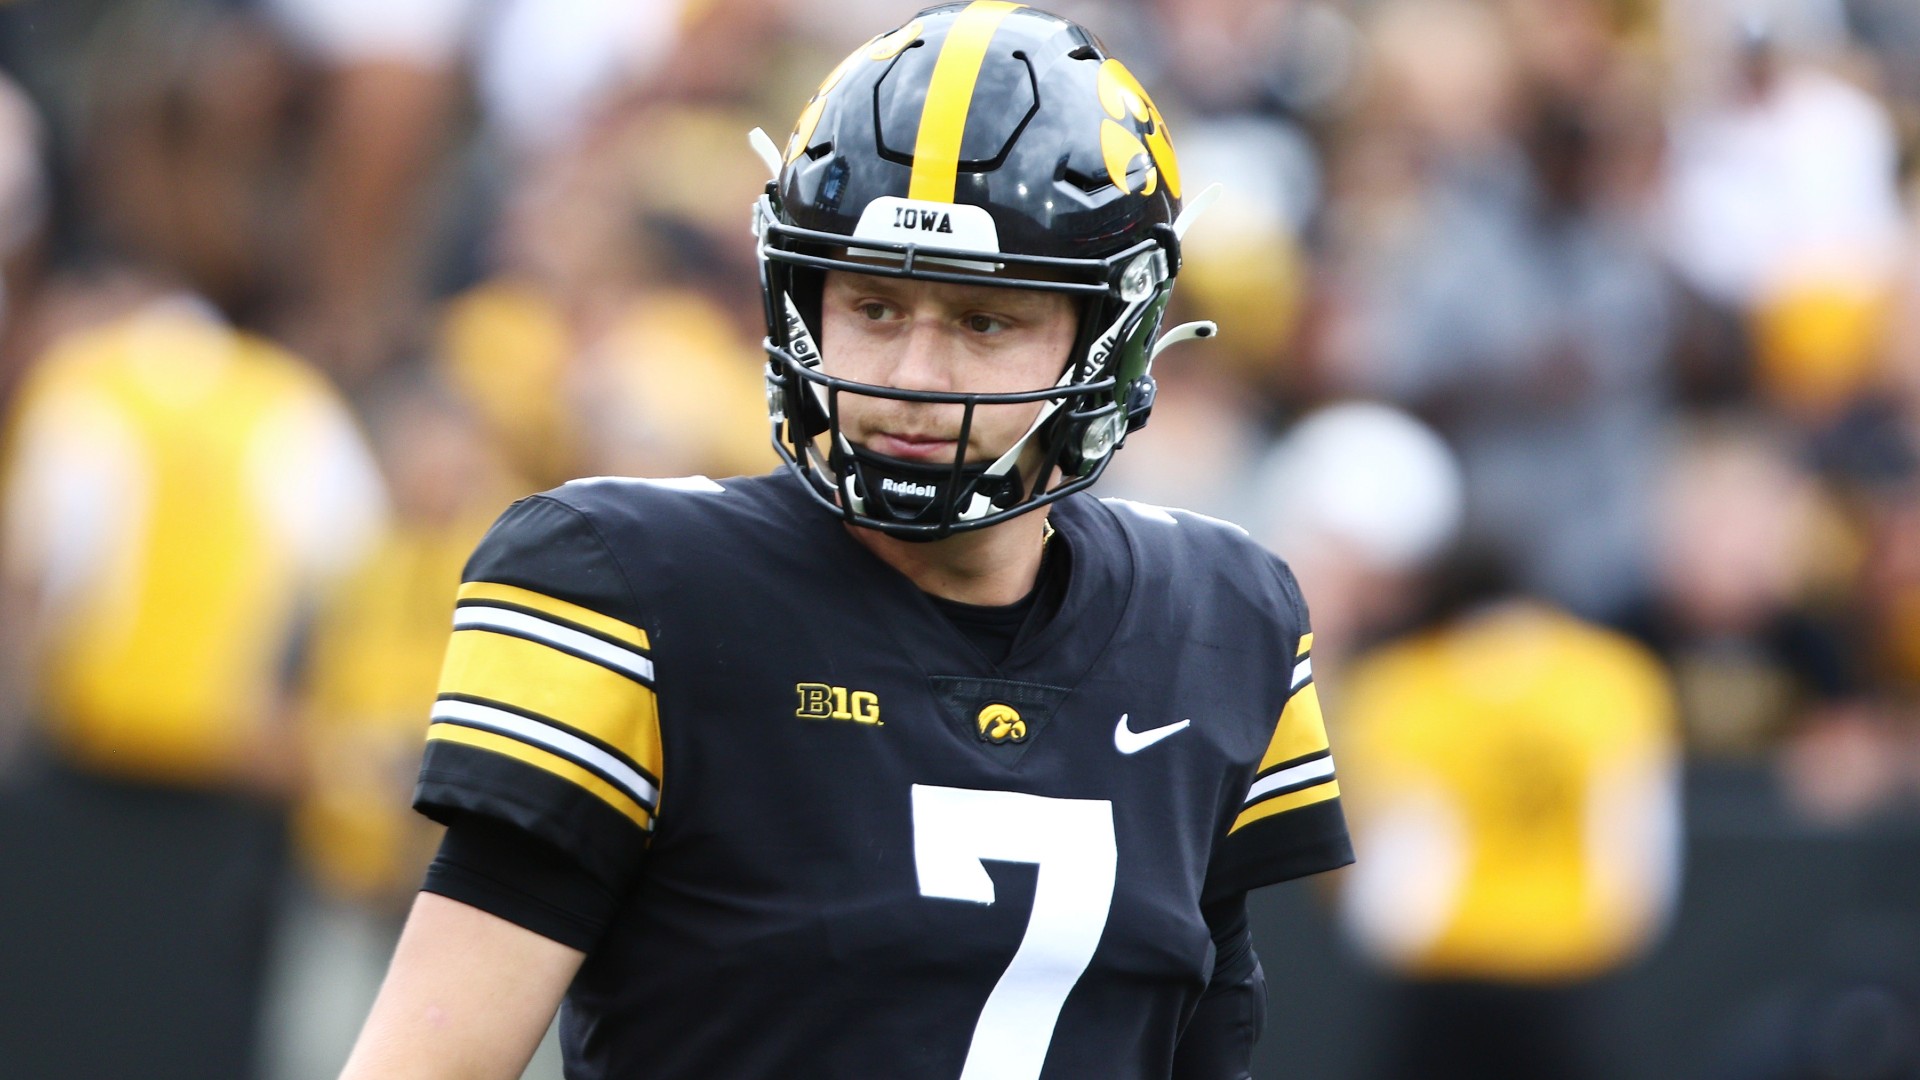 Iowa vs. Maryland: Kick Time, TV Channel, Online Streaming Info, Spread for Friday Game article feature image